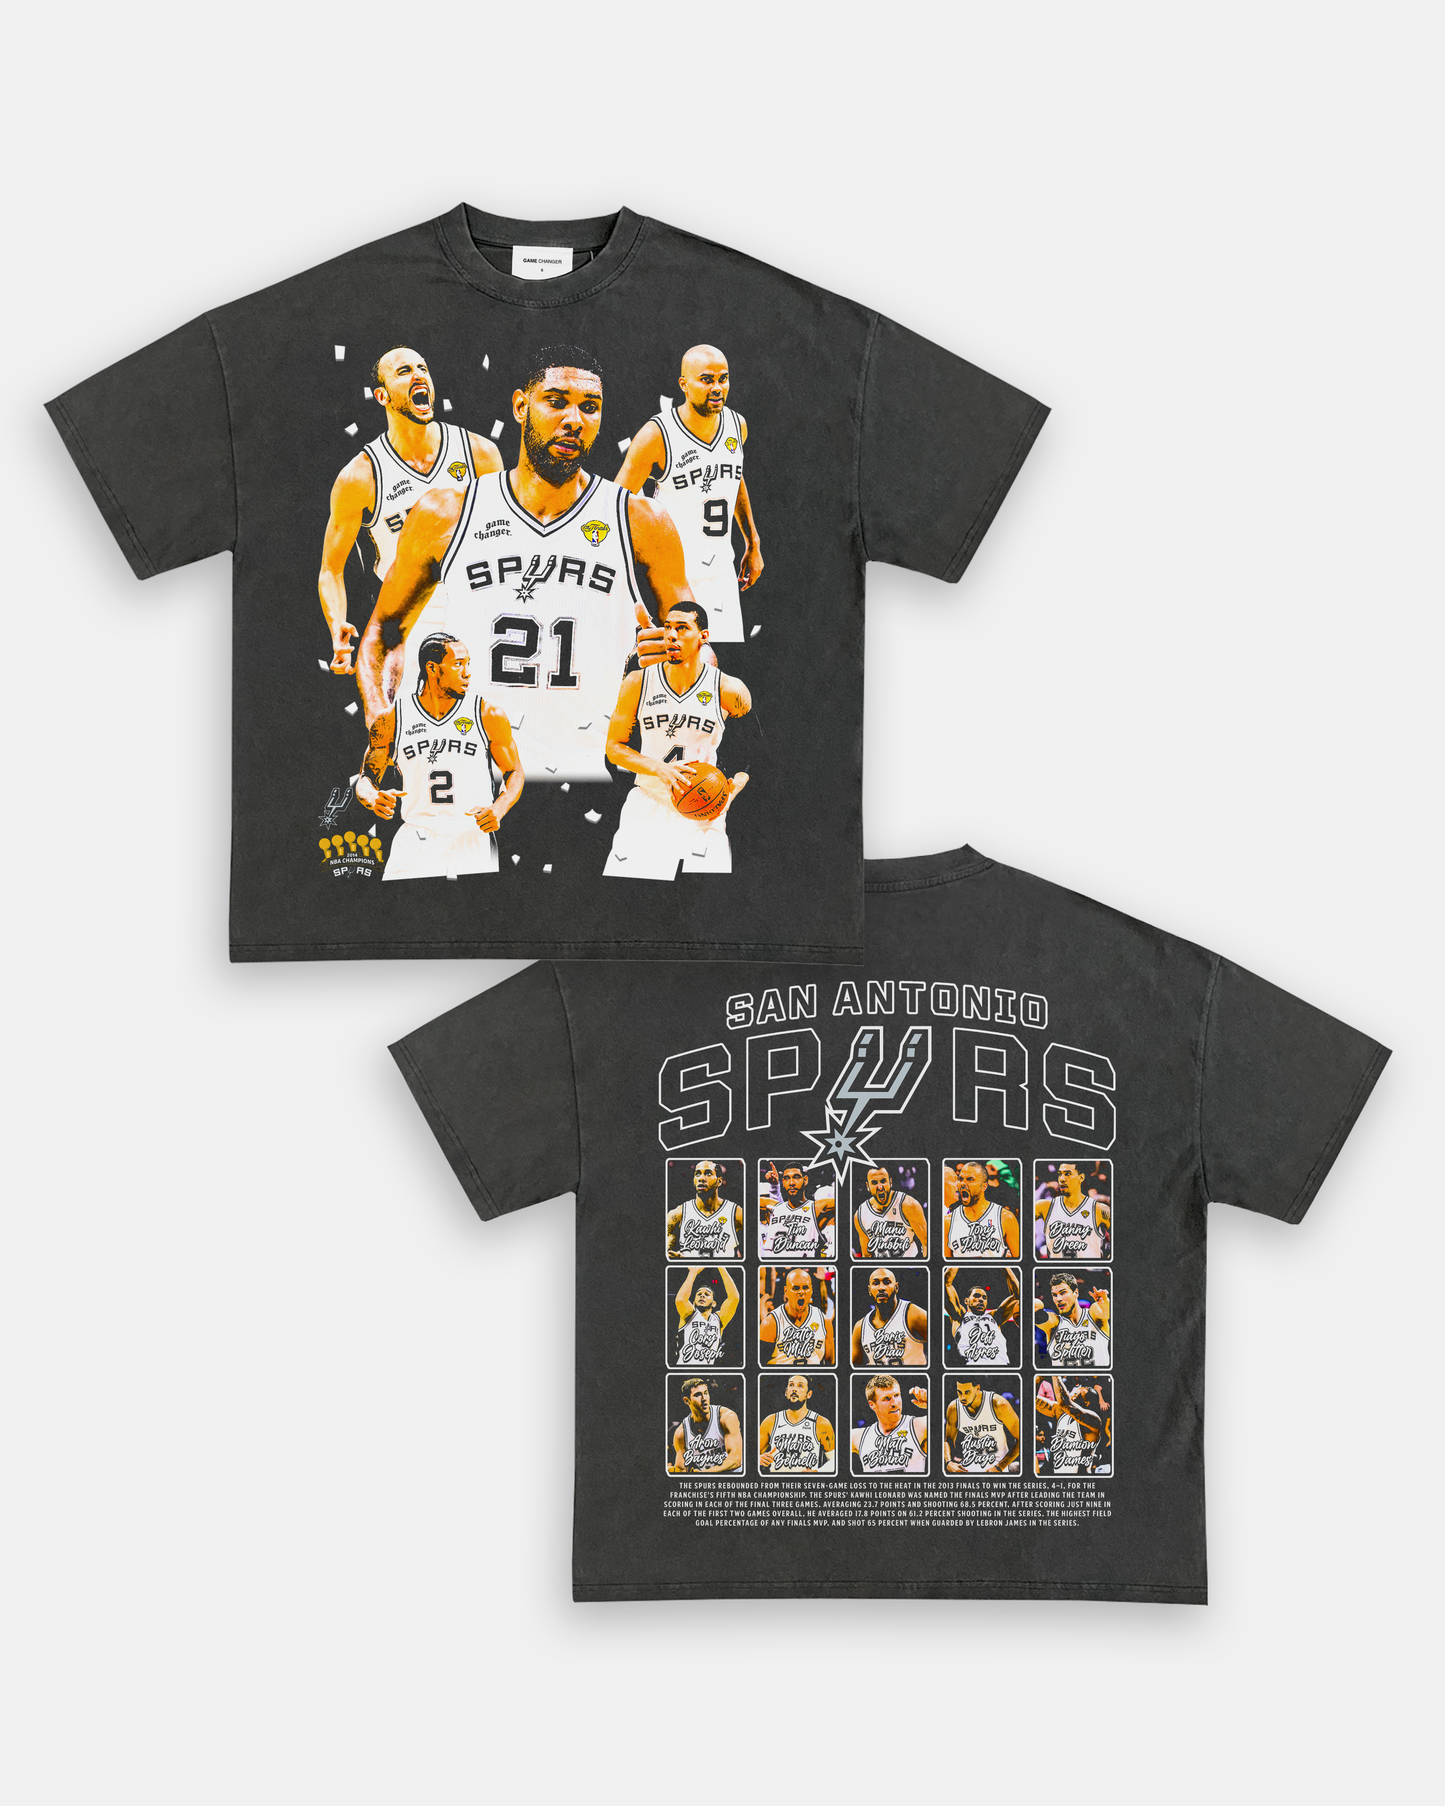 2014 NBA CHAMPS TEE - [DS]